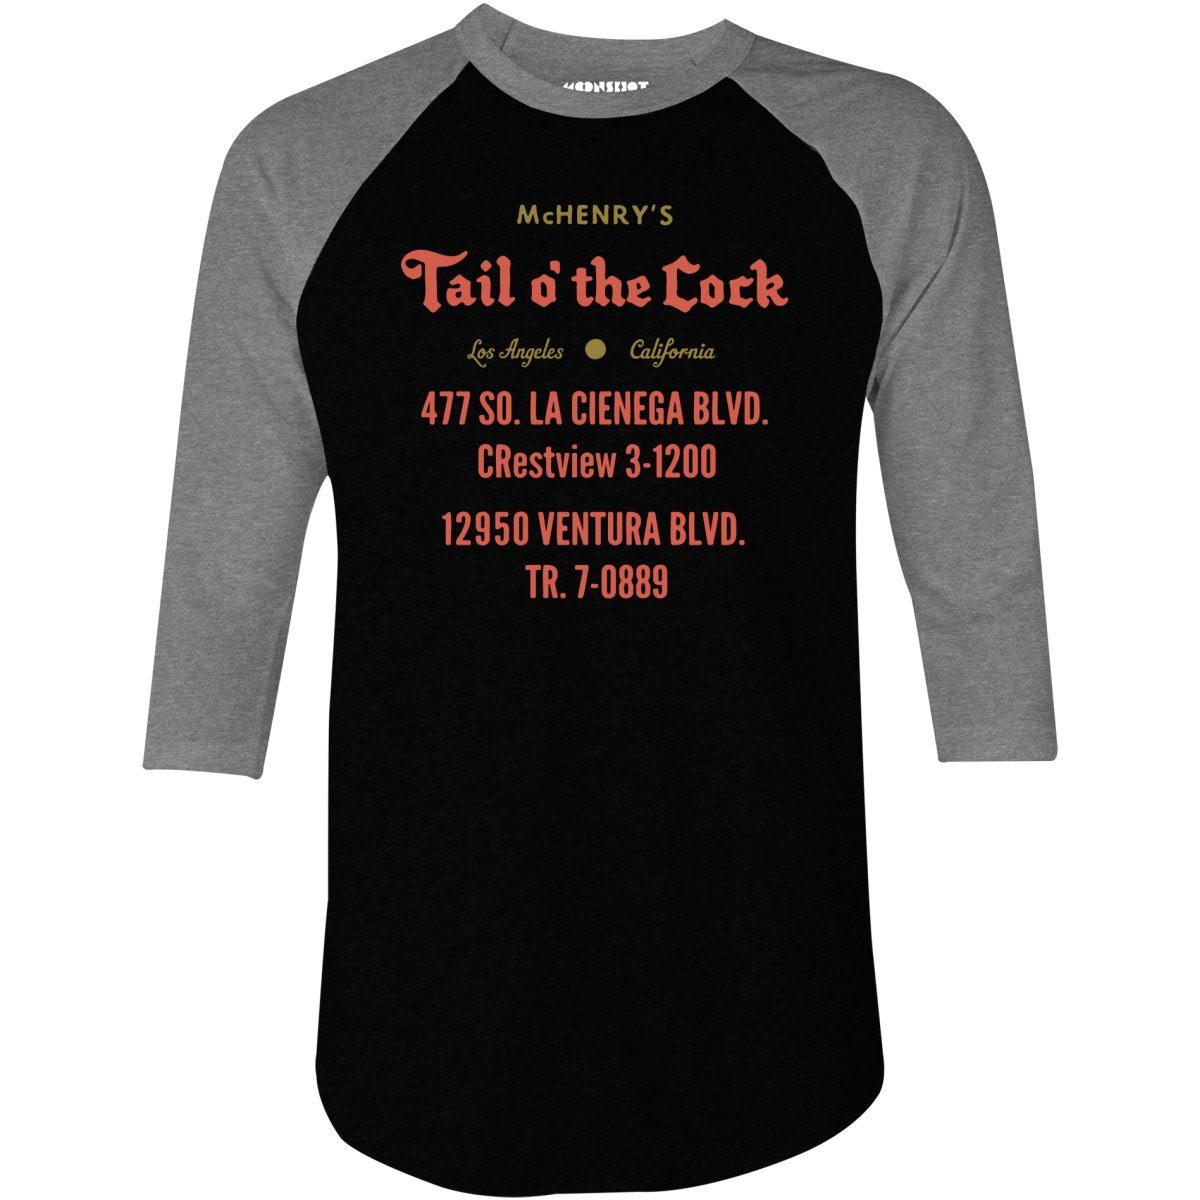 McHenry's Tail o' the Cock - Los Angeles, CA - Vintage Restaurant - 3/4 Sleeve Raglan T-Shirt